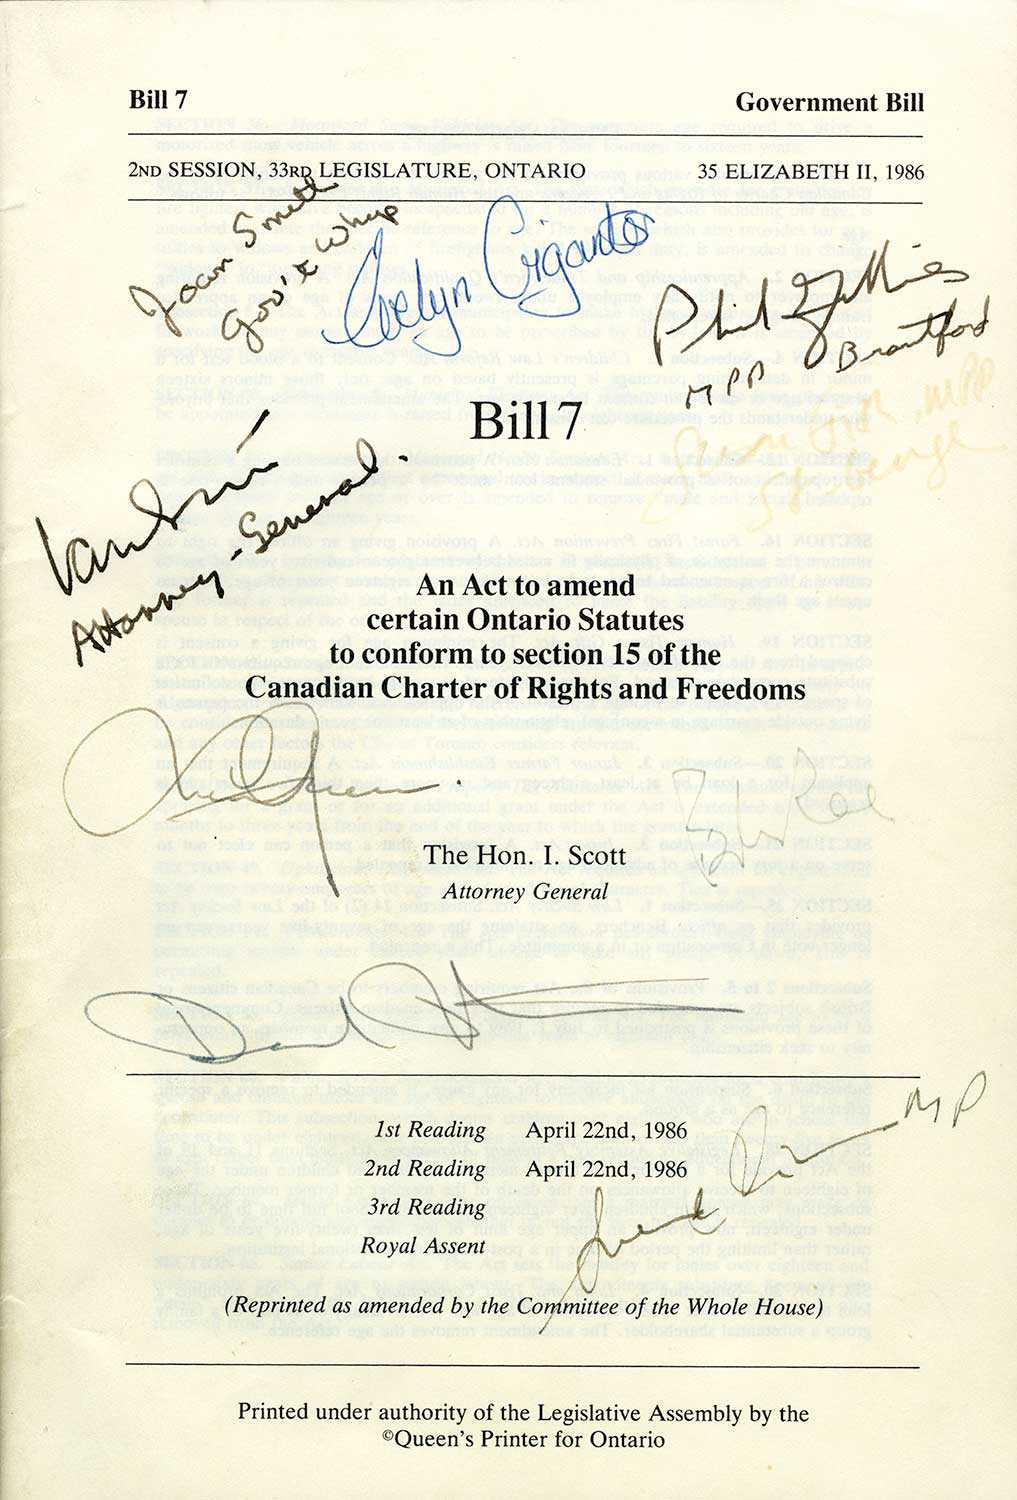 One of two copies of the Bill autographed by supportive politicians and activists (Photo courtesy of the Canadian Lesbian and Gay Archive)